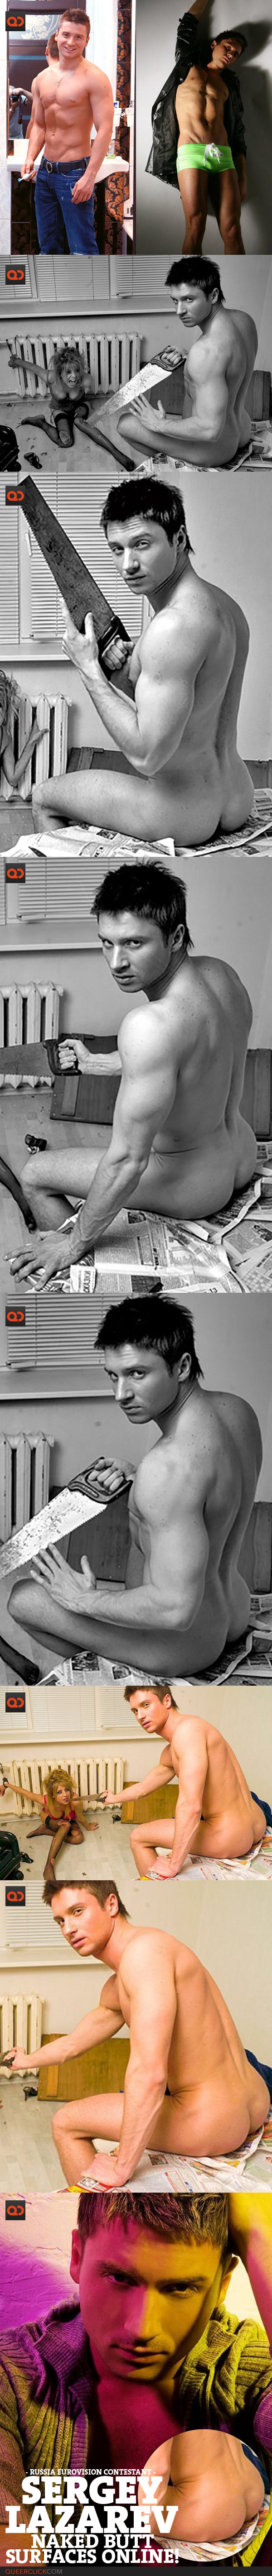 qc-exposed_sergey_lazarev_russia_eurovision_contestant_naked_butt_surfaces_online-collage03